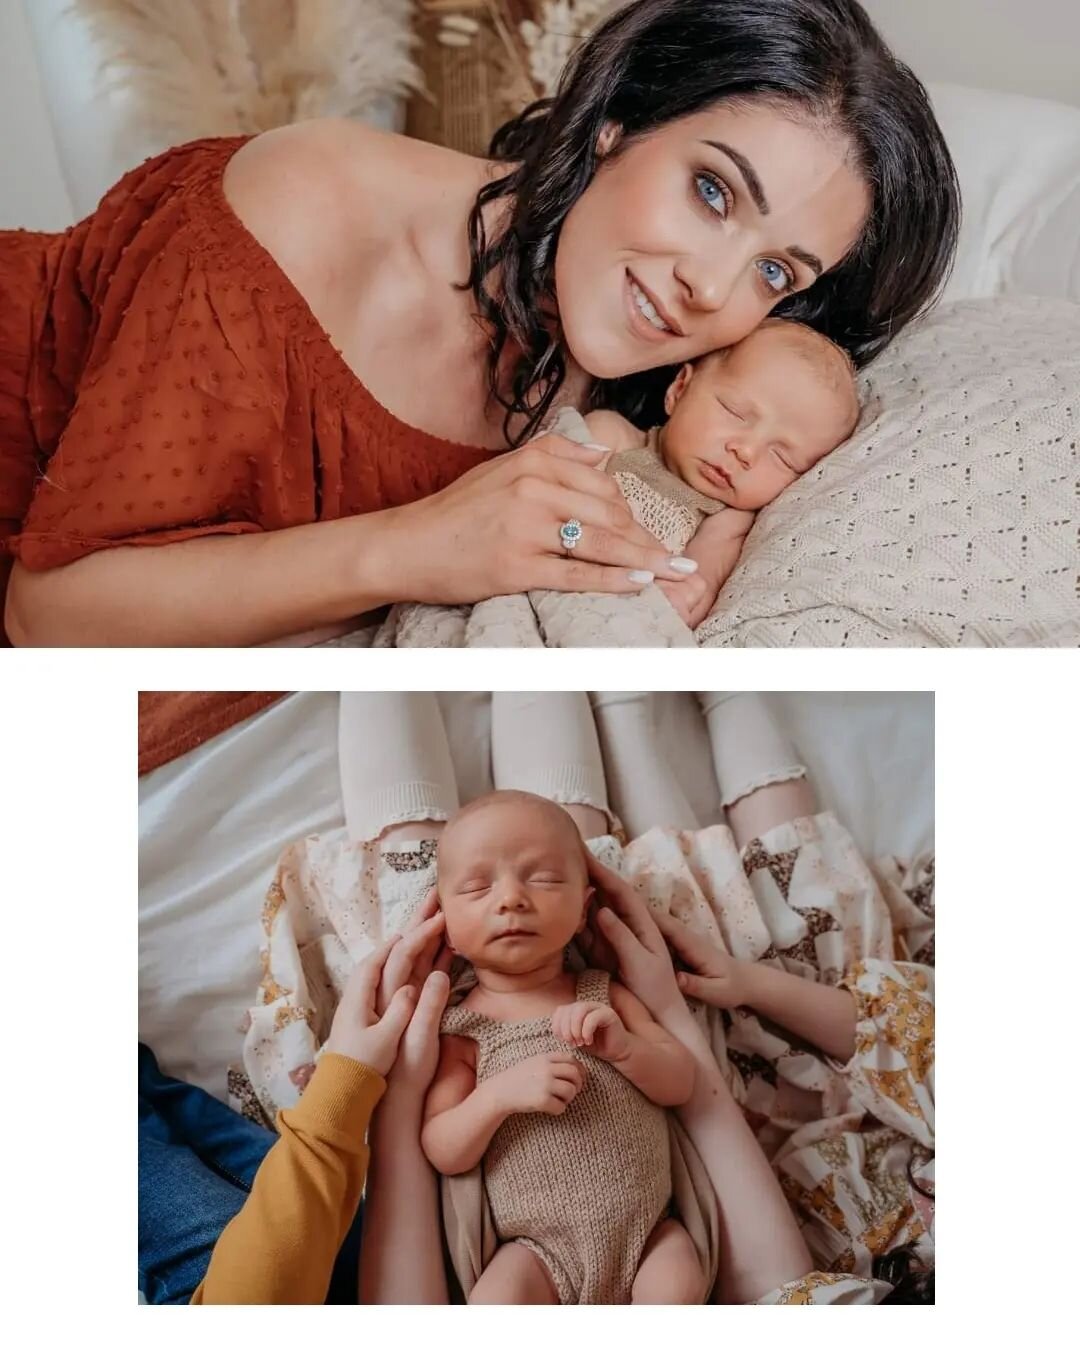 I could not narrow this shoot down any further - there were just soooooo many stunning shots!!

I could photograph Denise all day long - such perfect skin and the bluest eyes you have ever seen! Honestly the whole family....not least their newest han